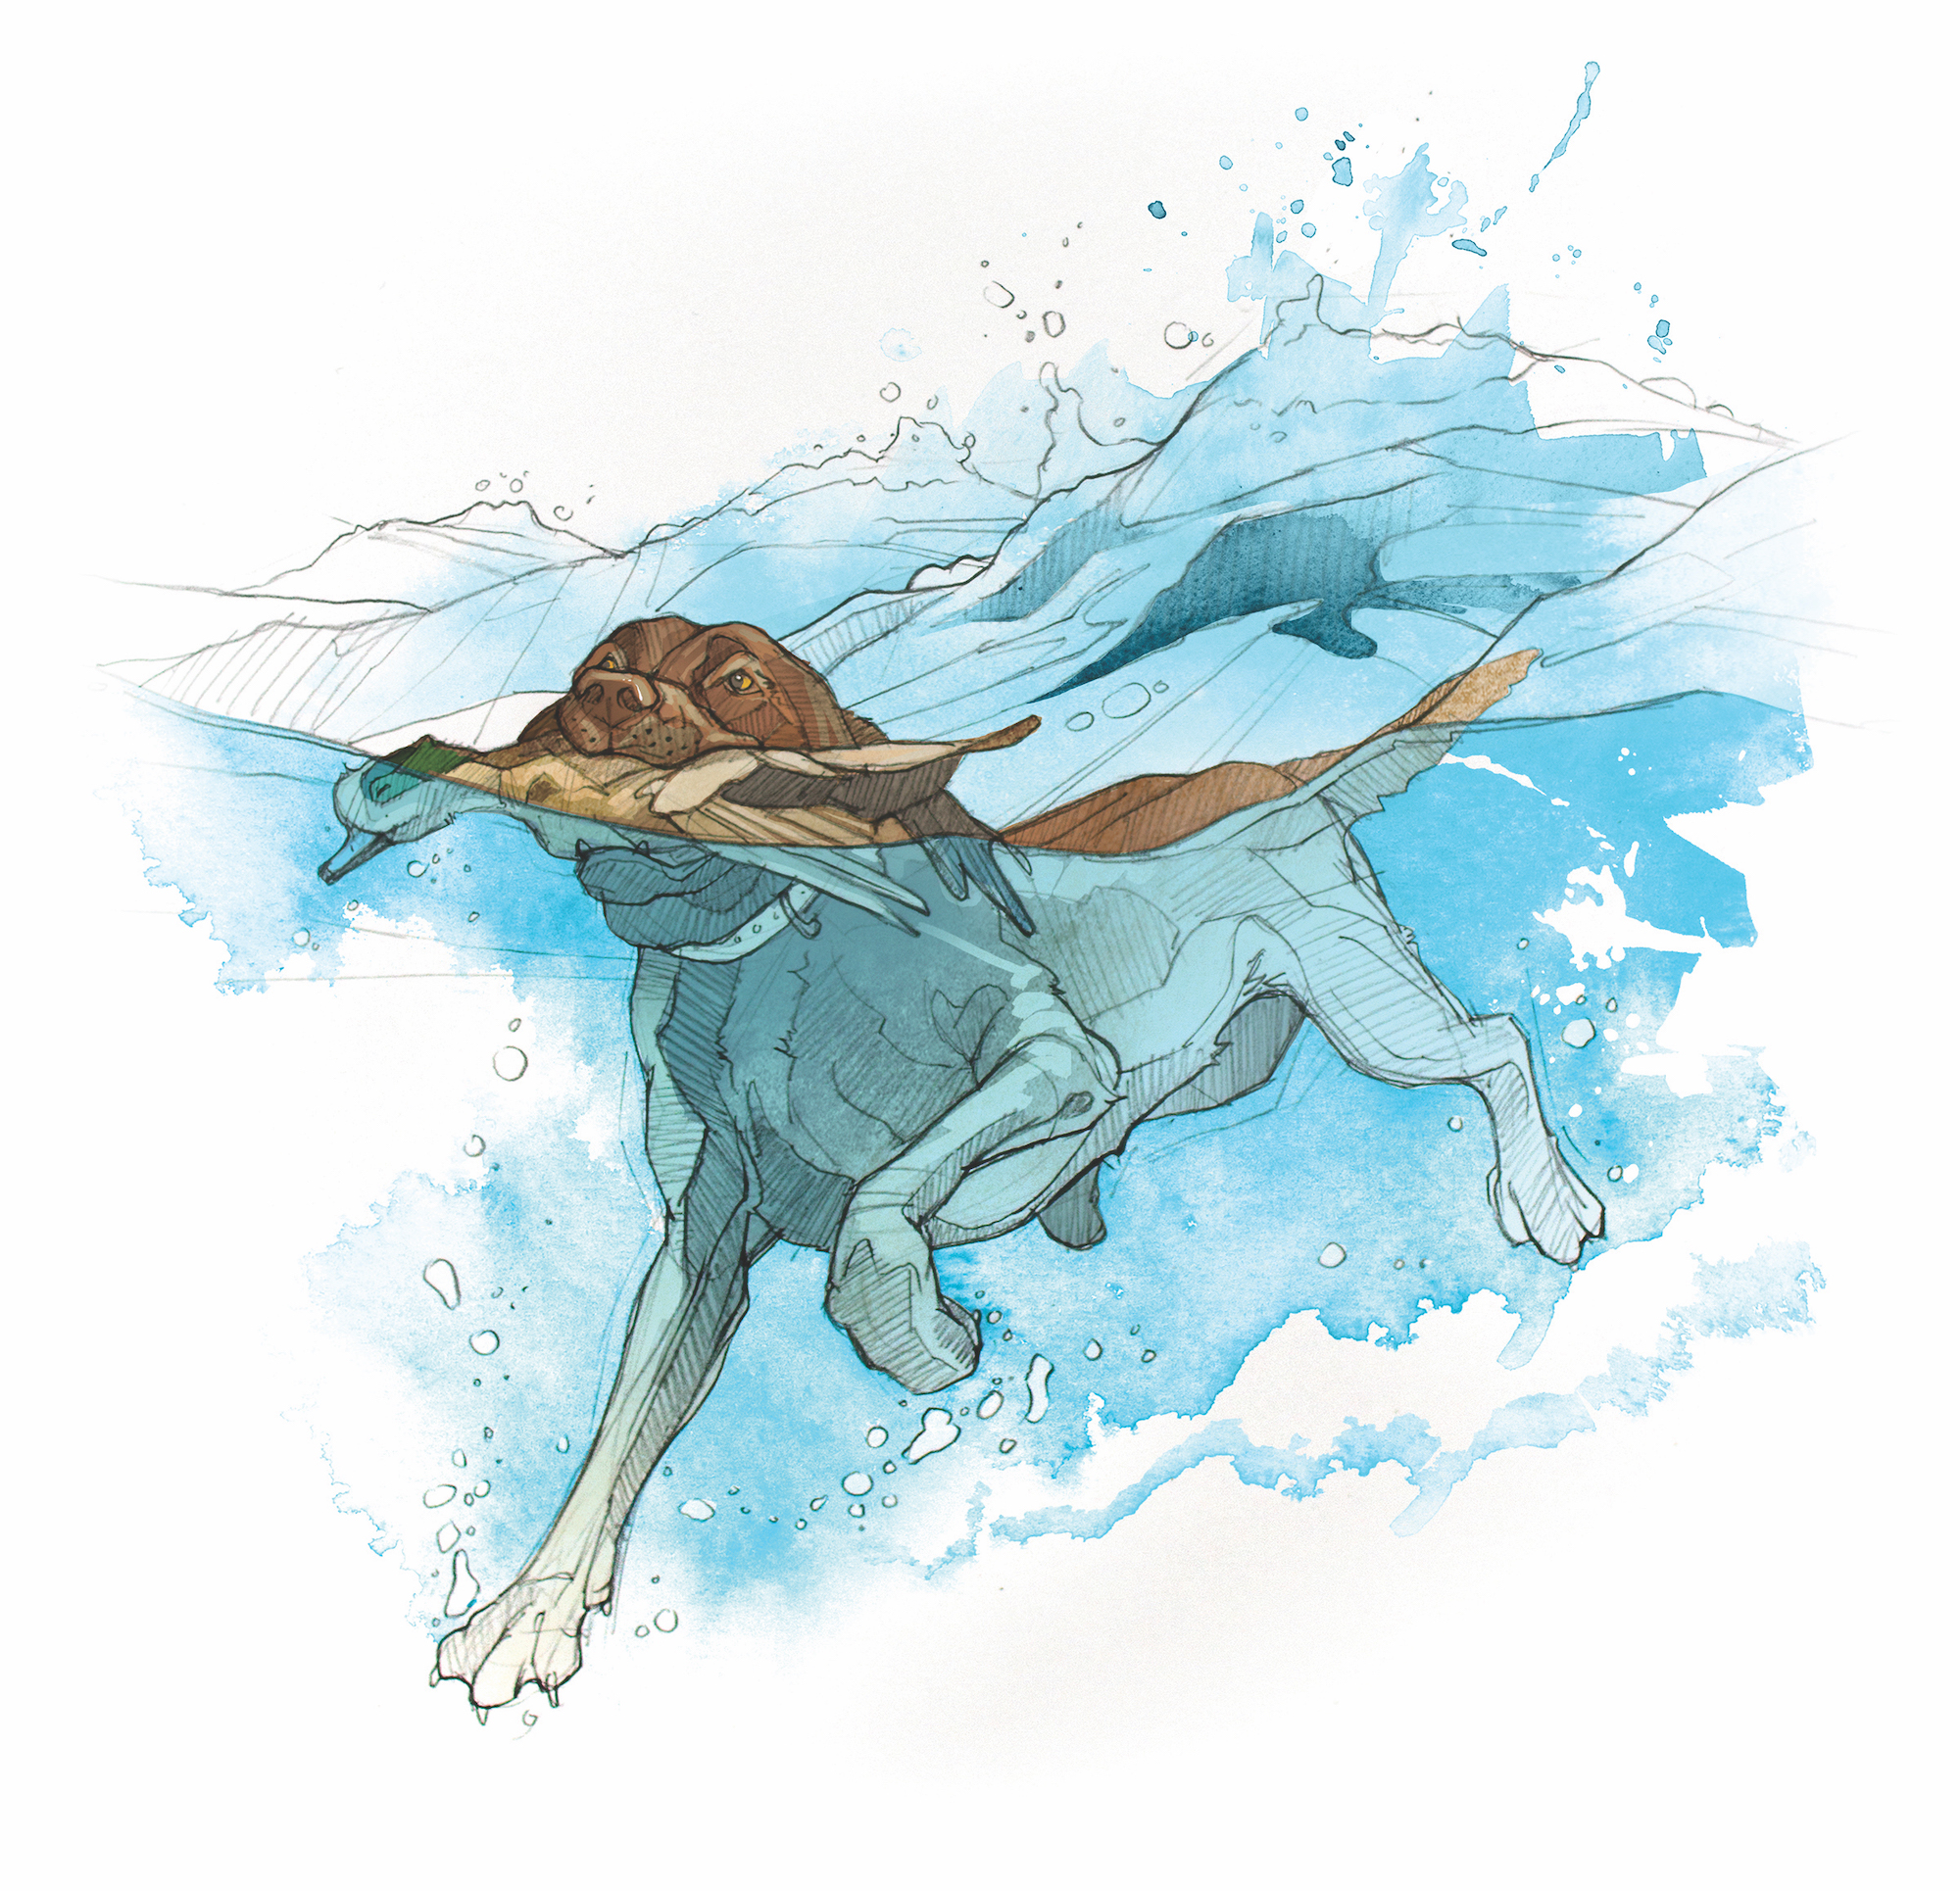 An illustration of a Lab swimming in deep water.